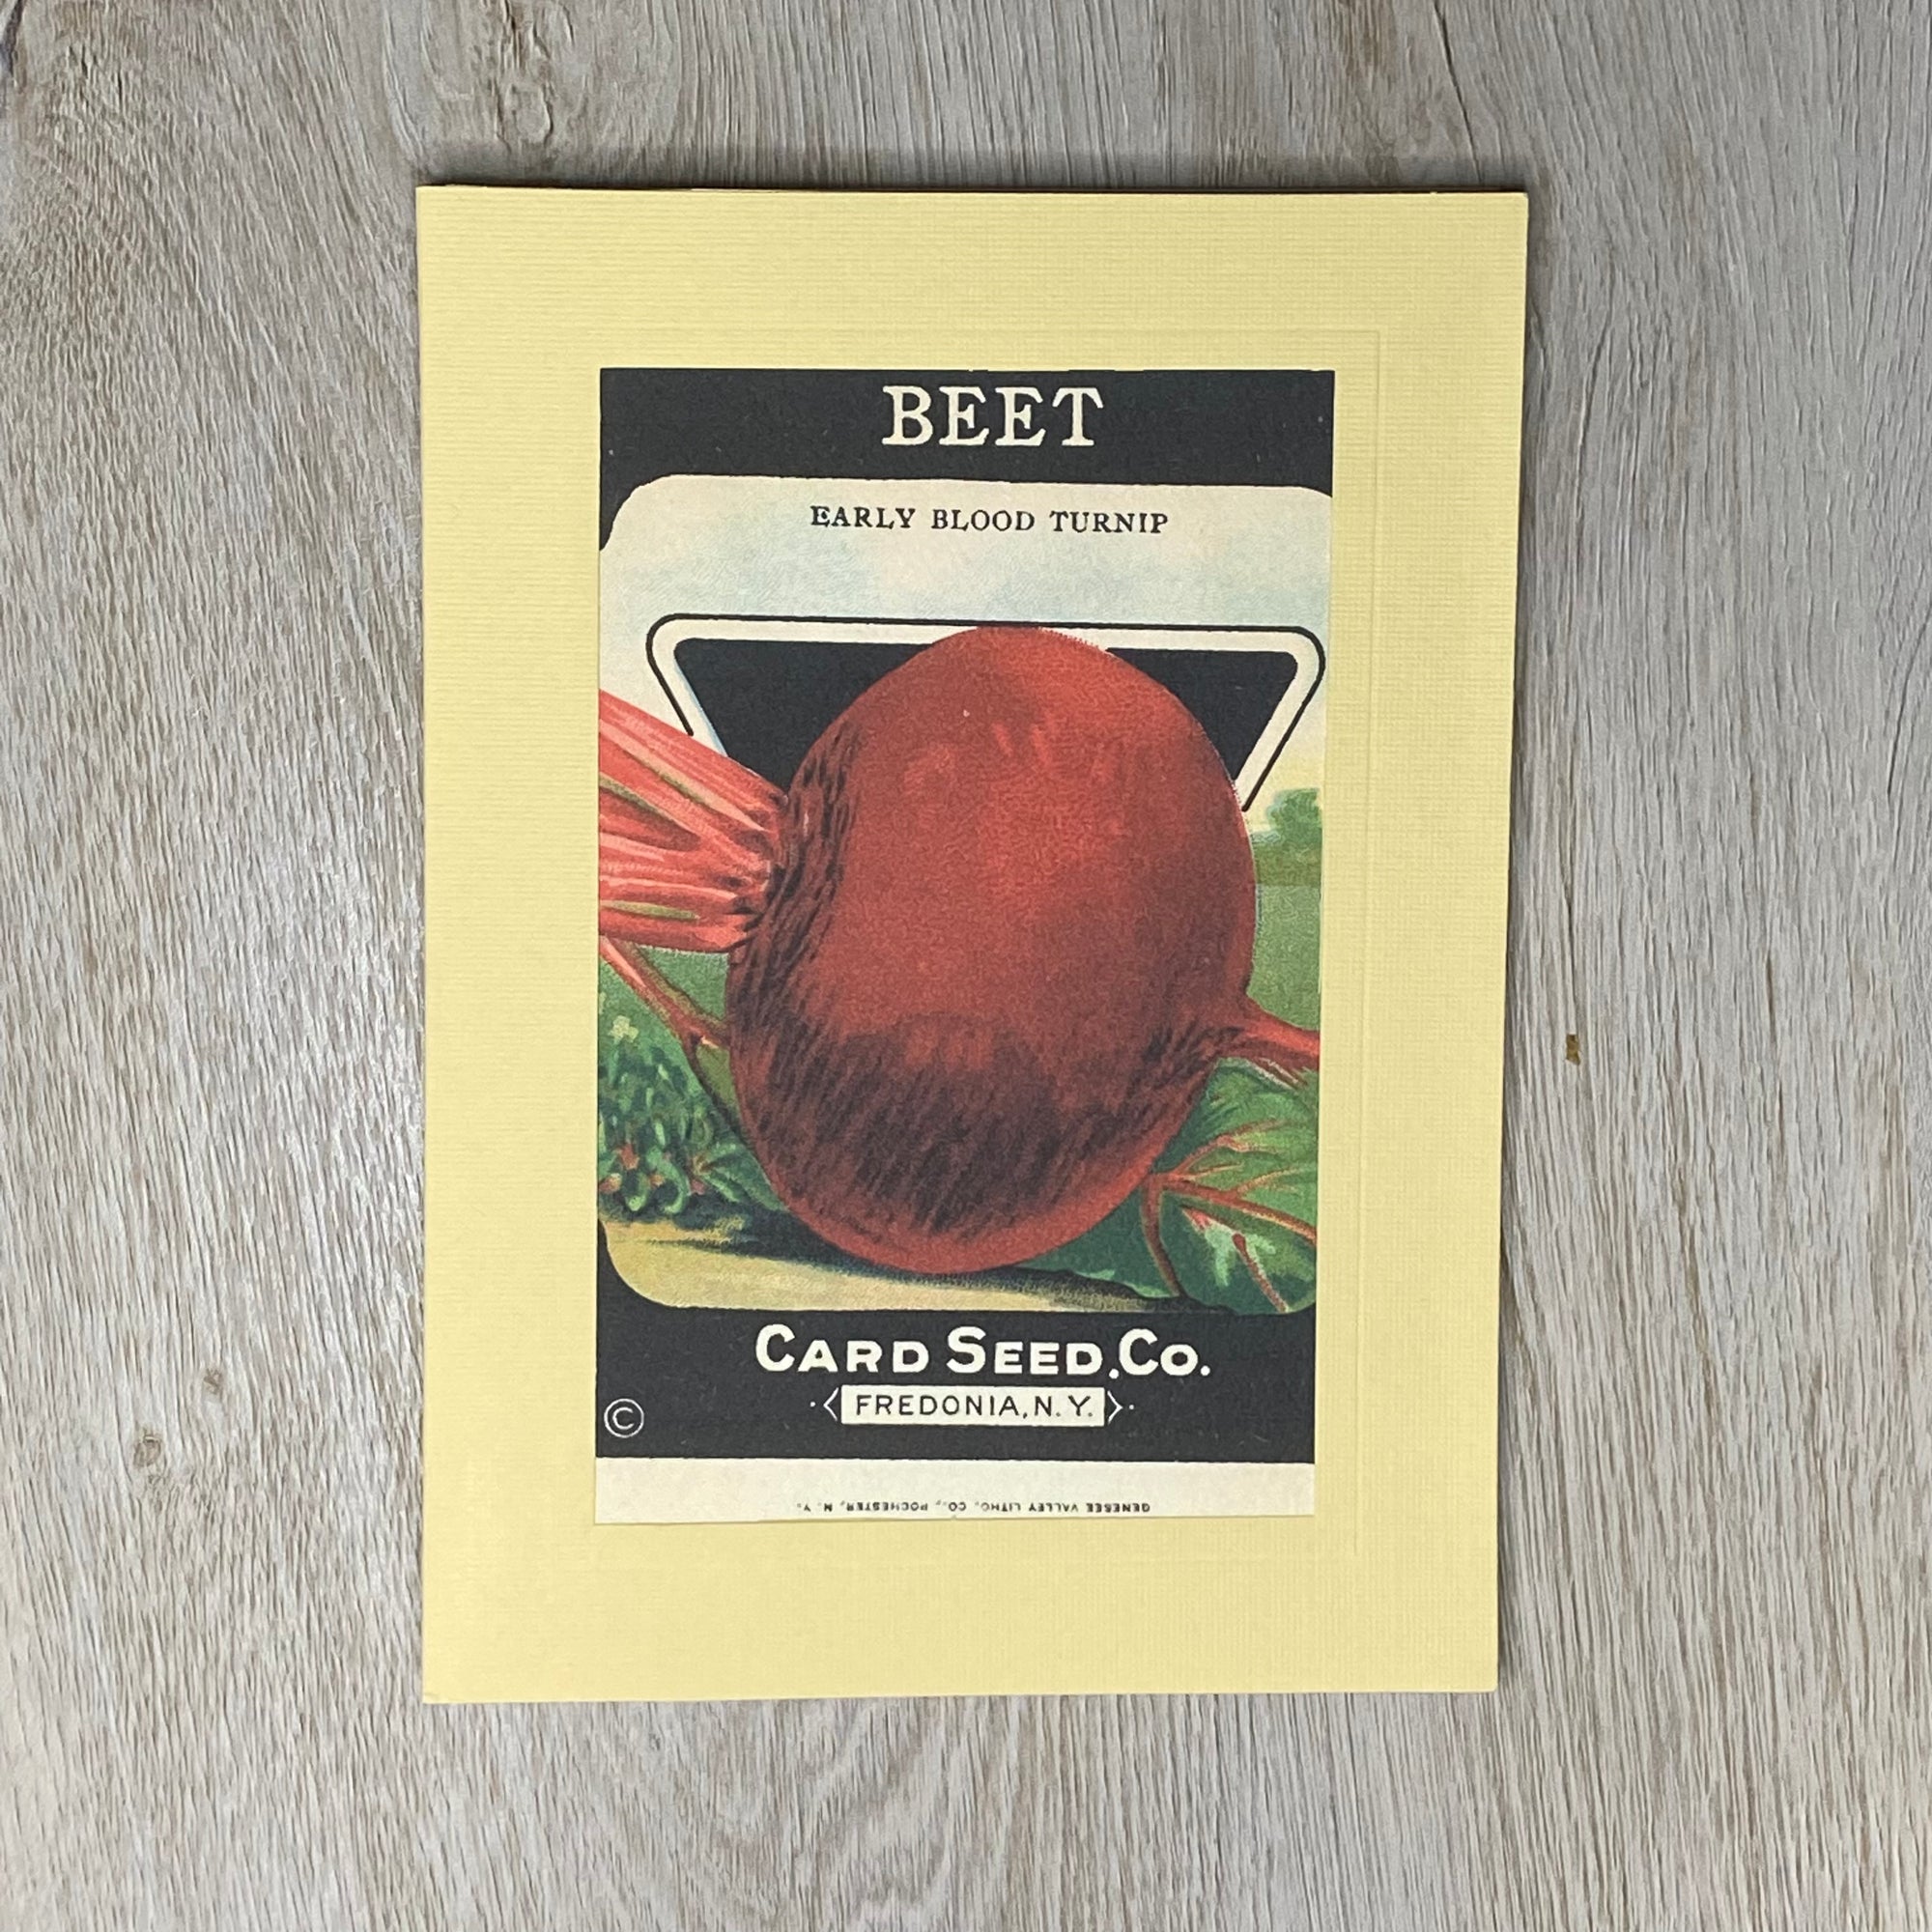 Beets-Greetings from the Past-Plymouth Cards